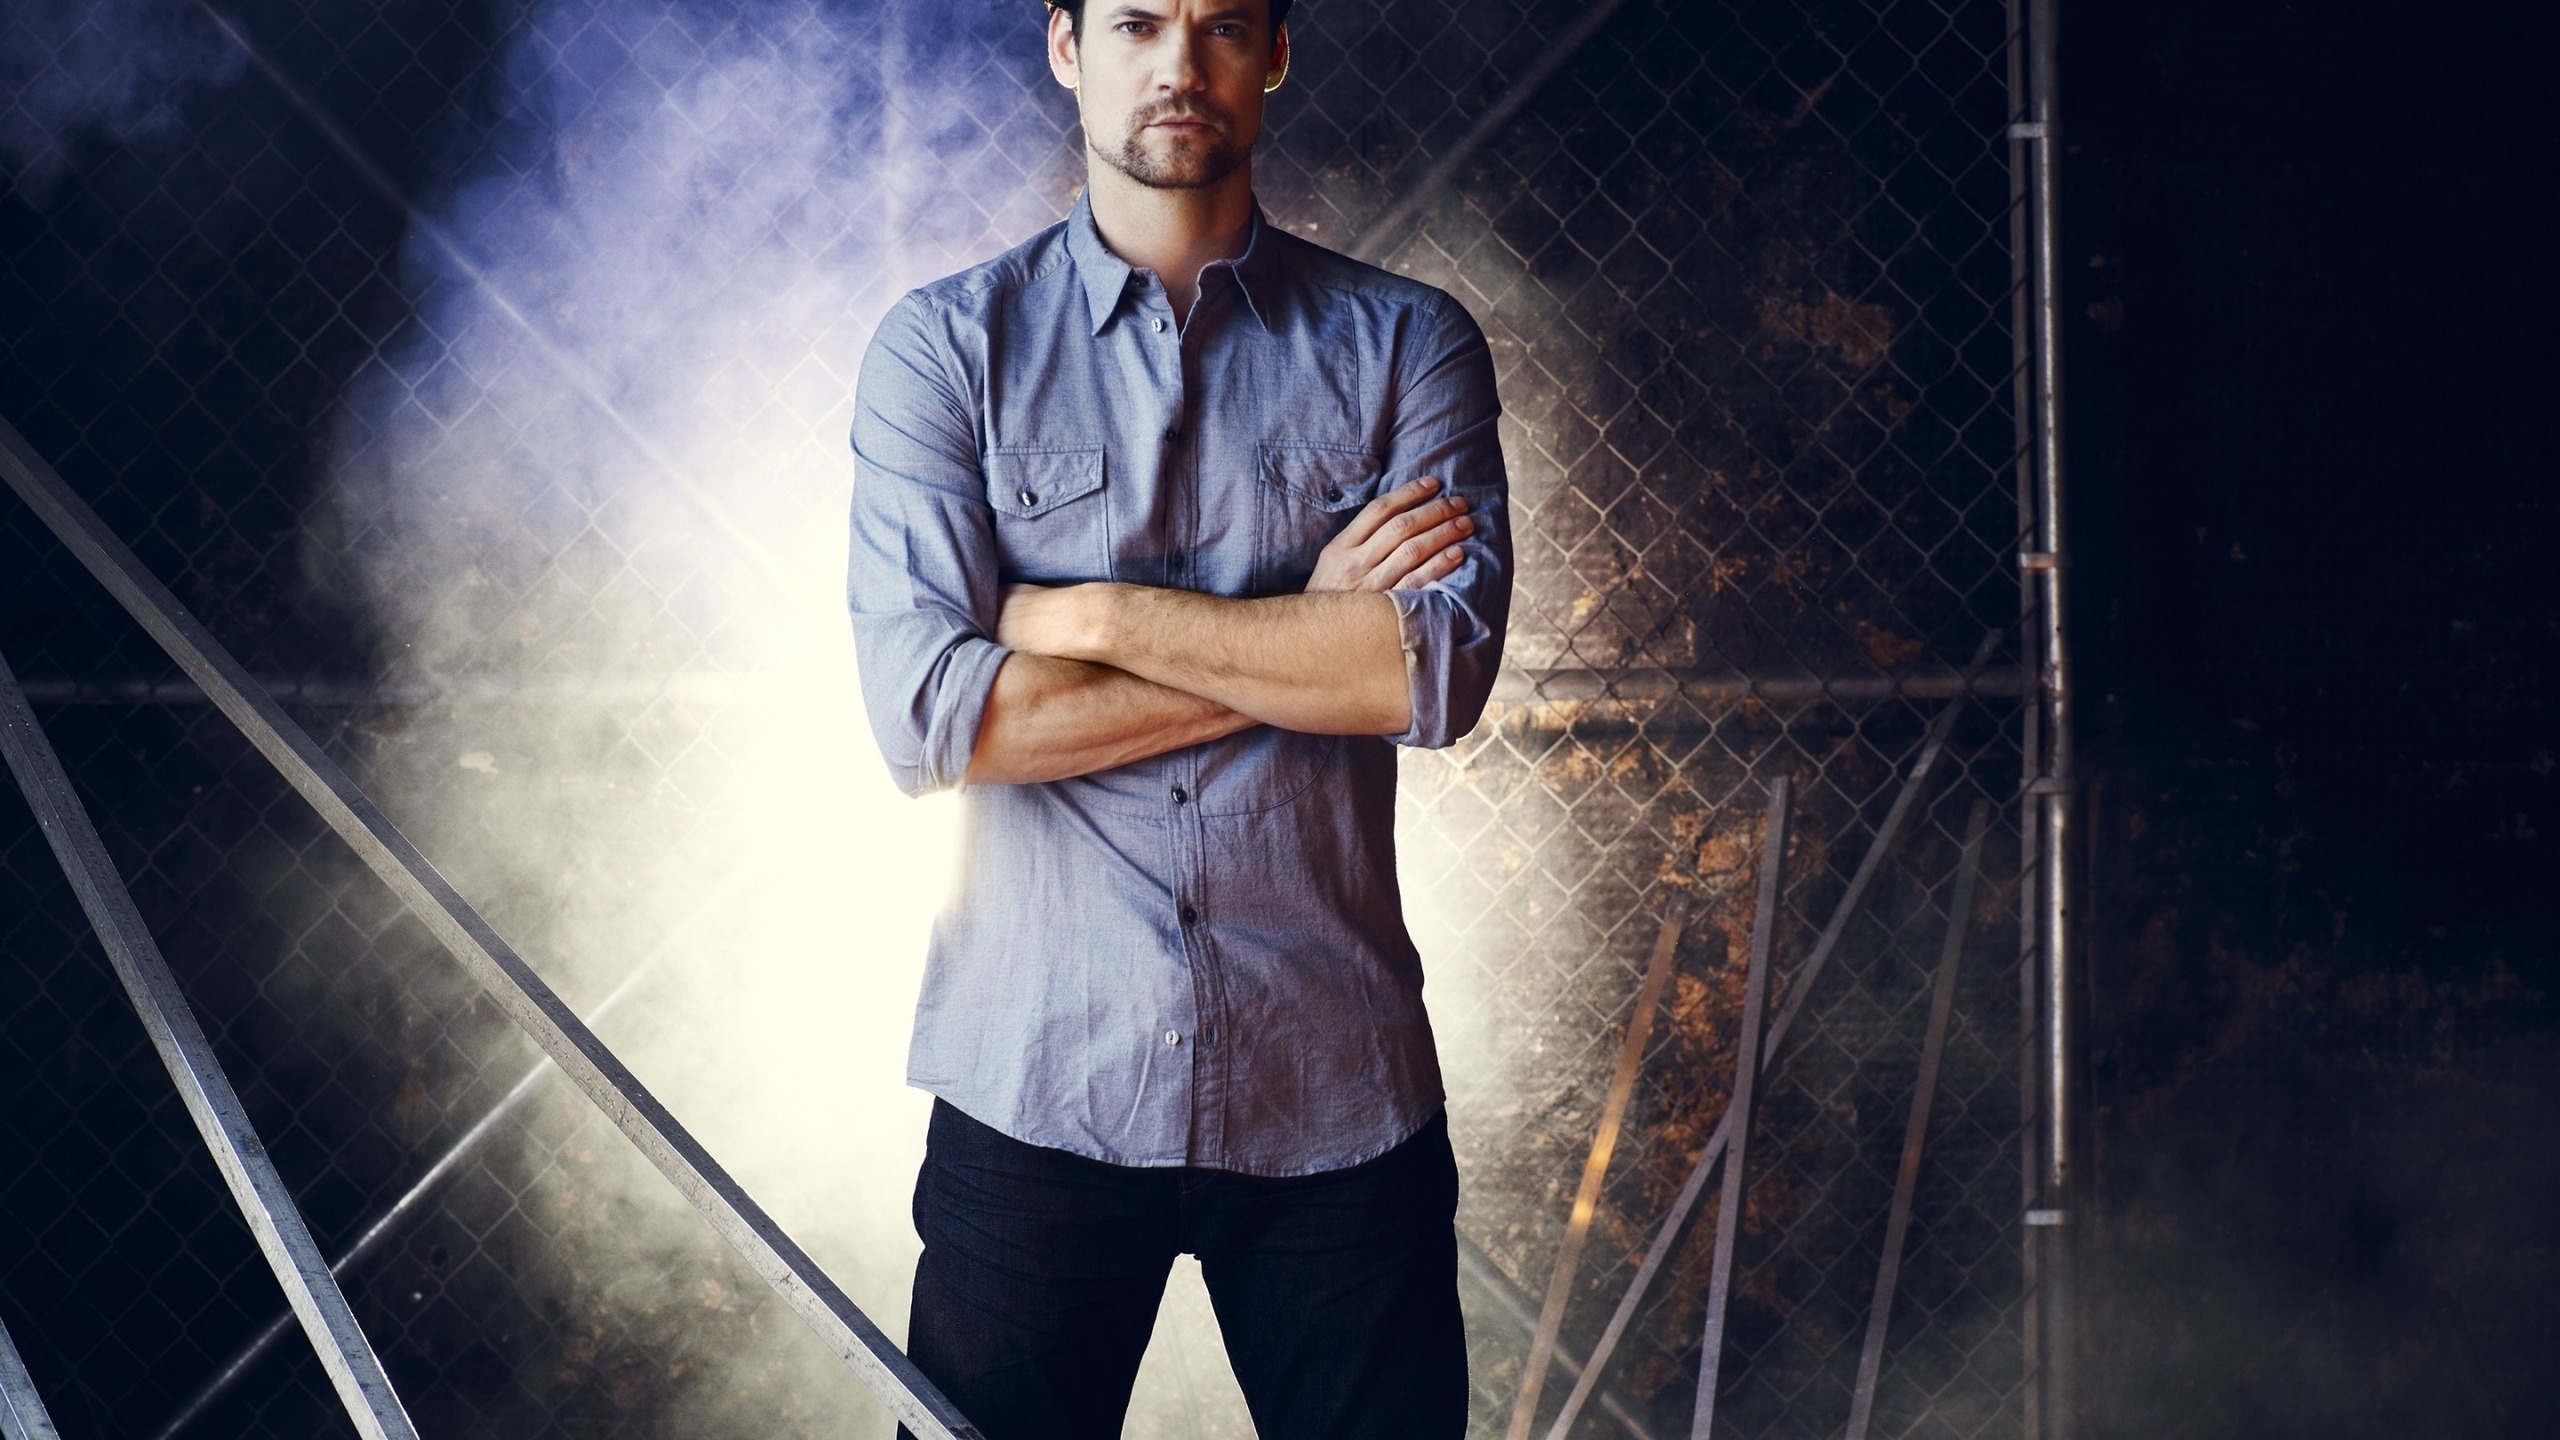 Shane West Cool for 2560x1440 HDTV resolution